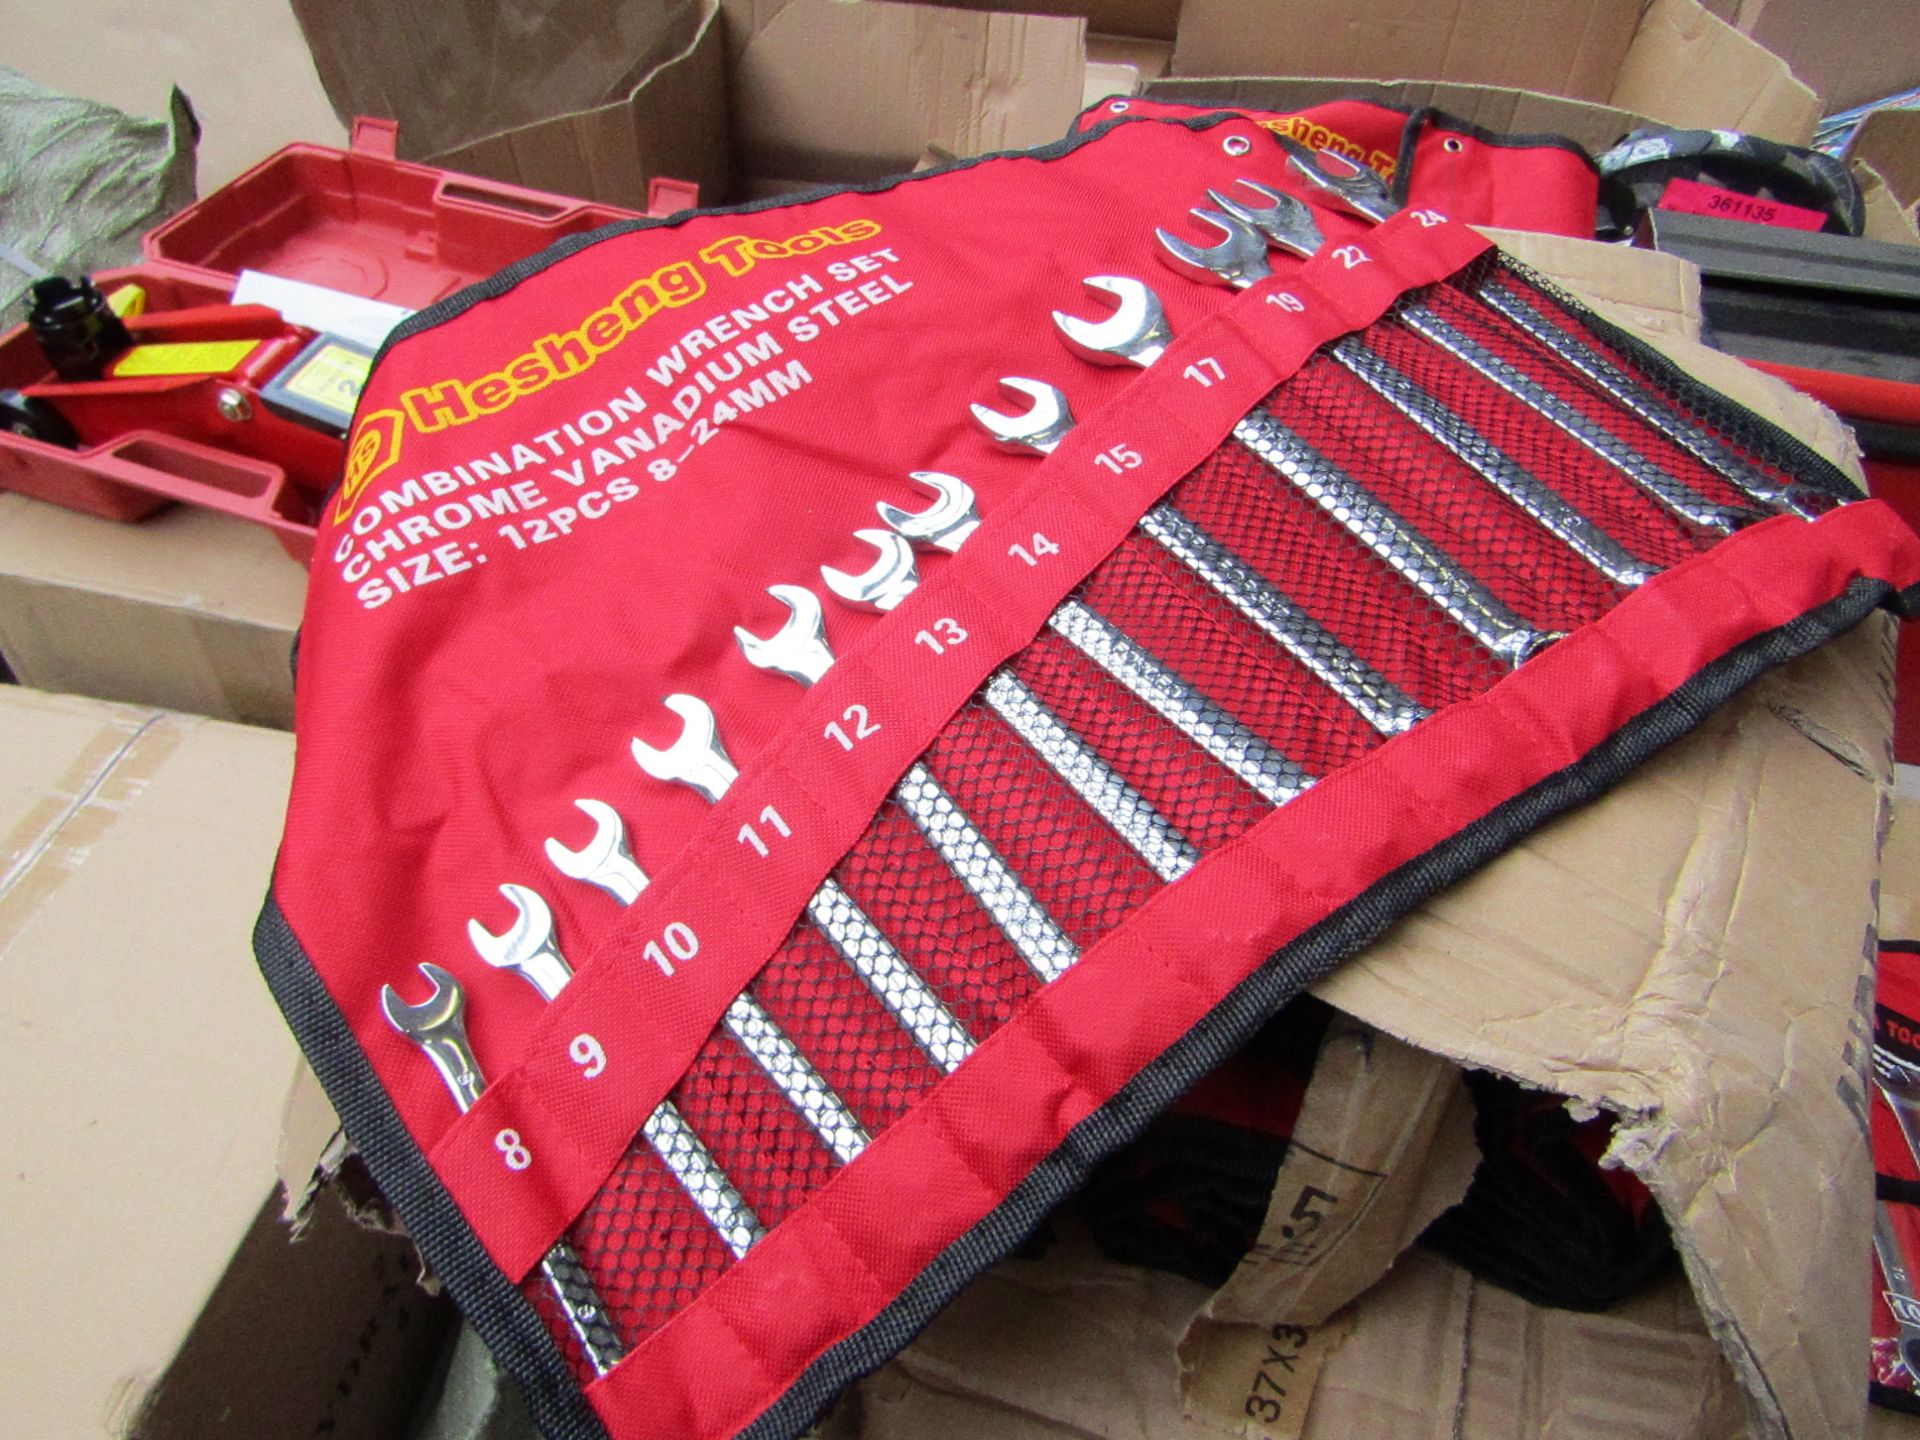 Hesheng Tools 12 Piece Combination spanner set in carry roll, new